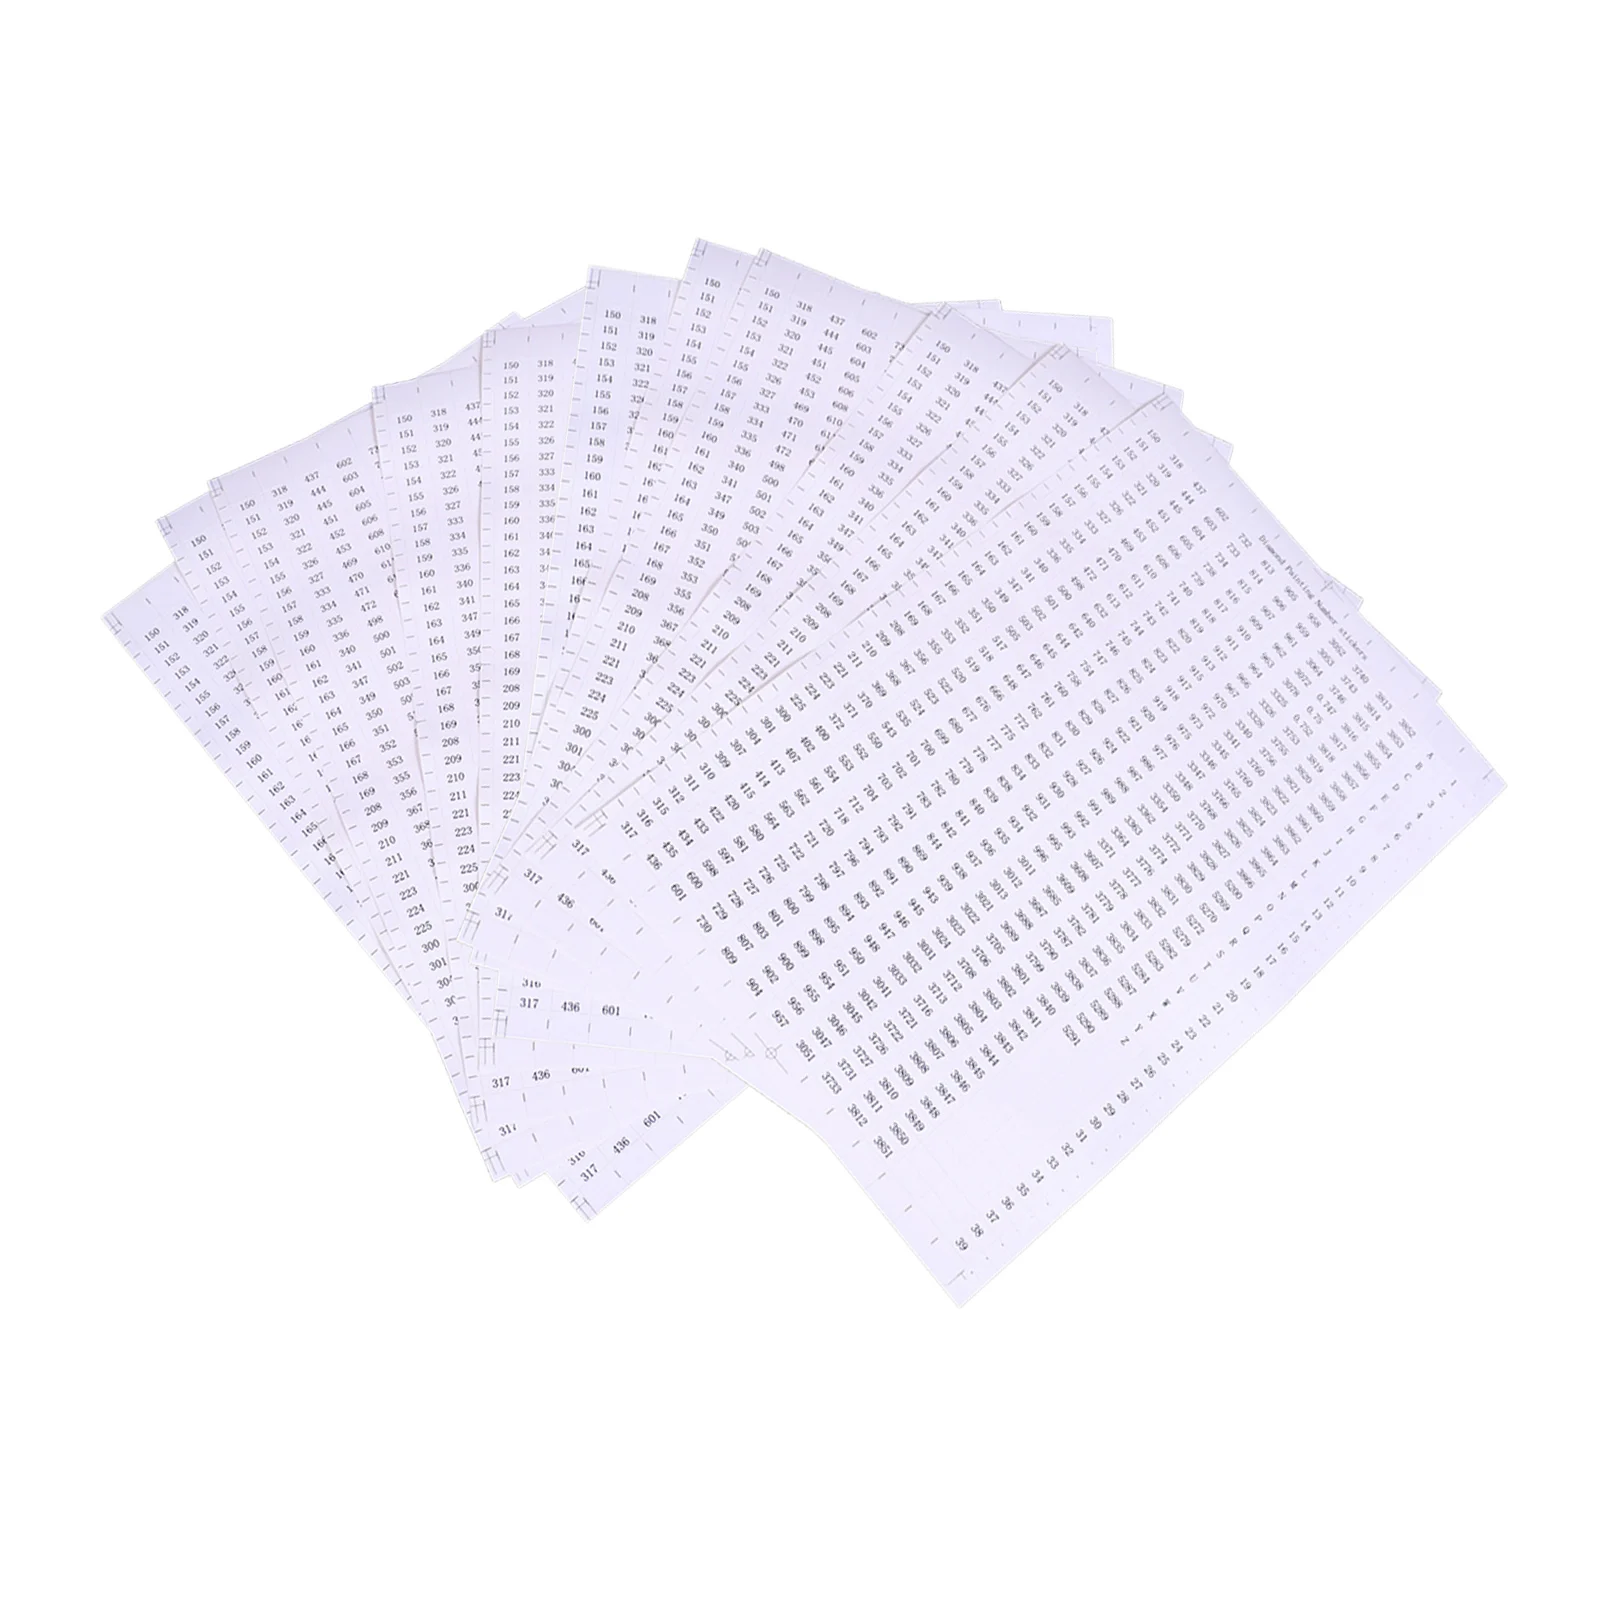 Square Sticker Paper by Number with Handwriting Label Thread Embroidery Cross Stitch Floss Thread Tool Accessory Labels Supplies